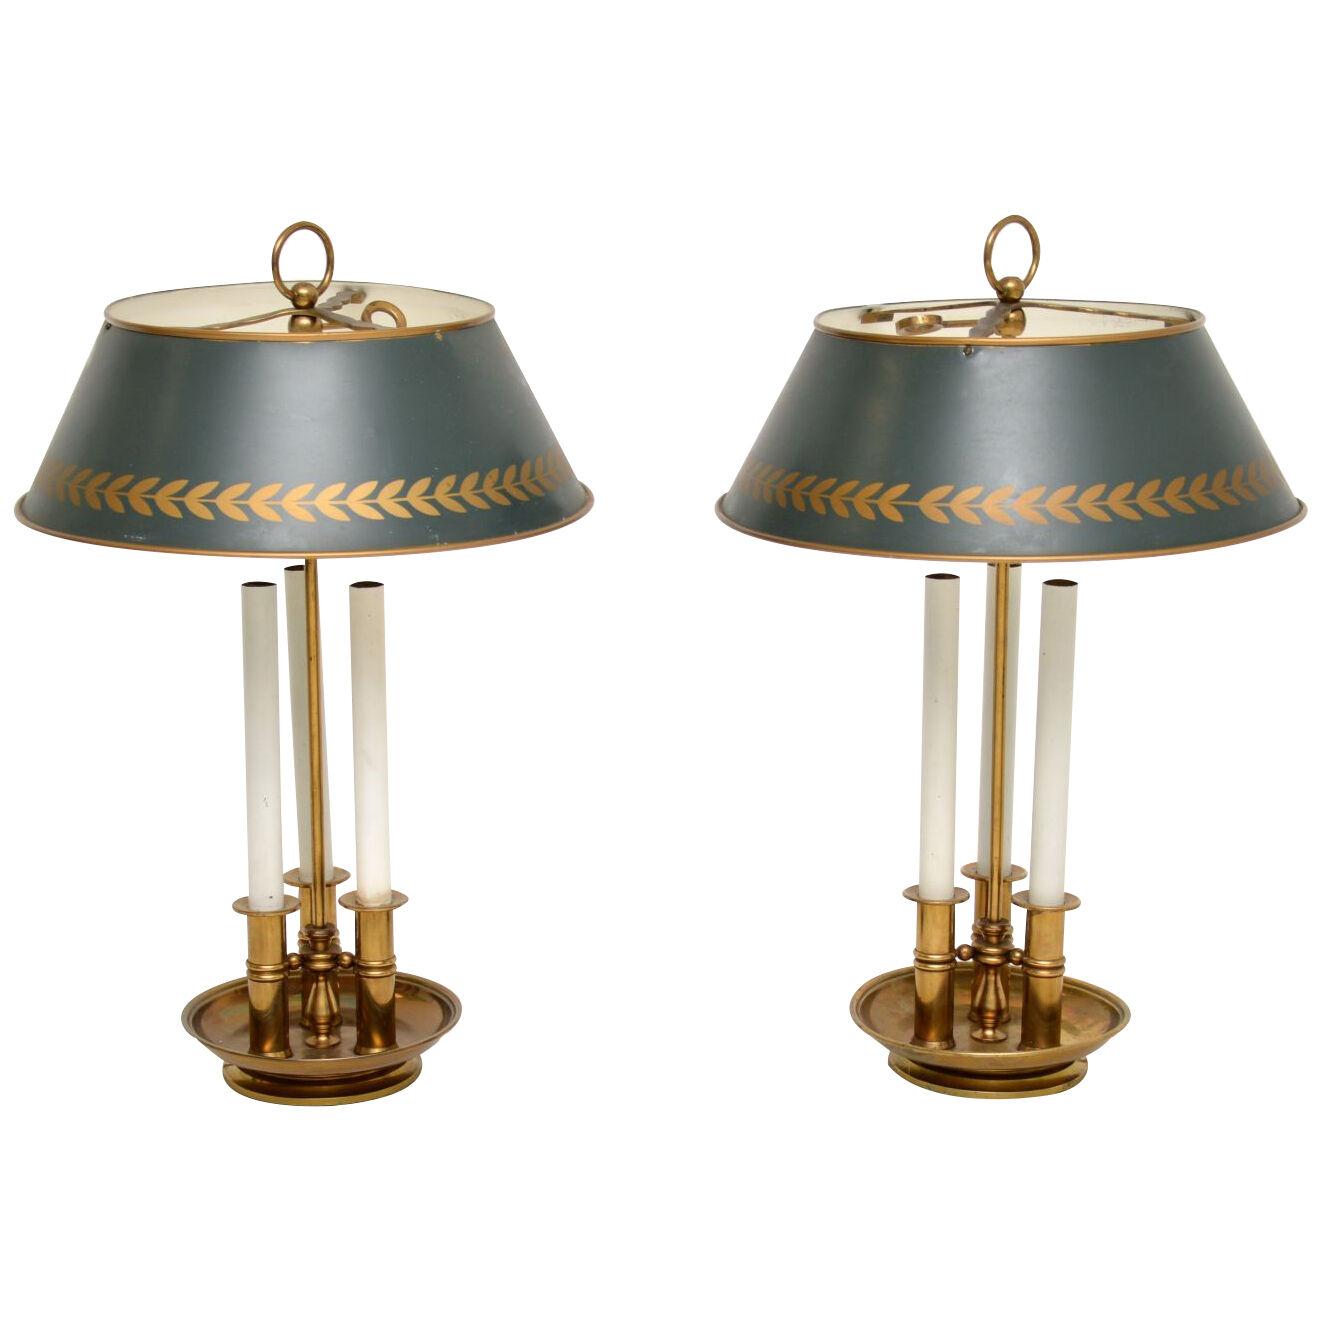 Pair of Antique Tole & Brass Table Lamps